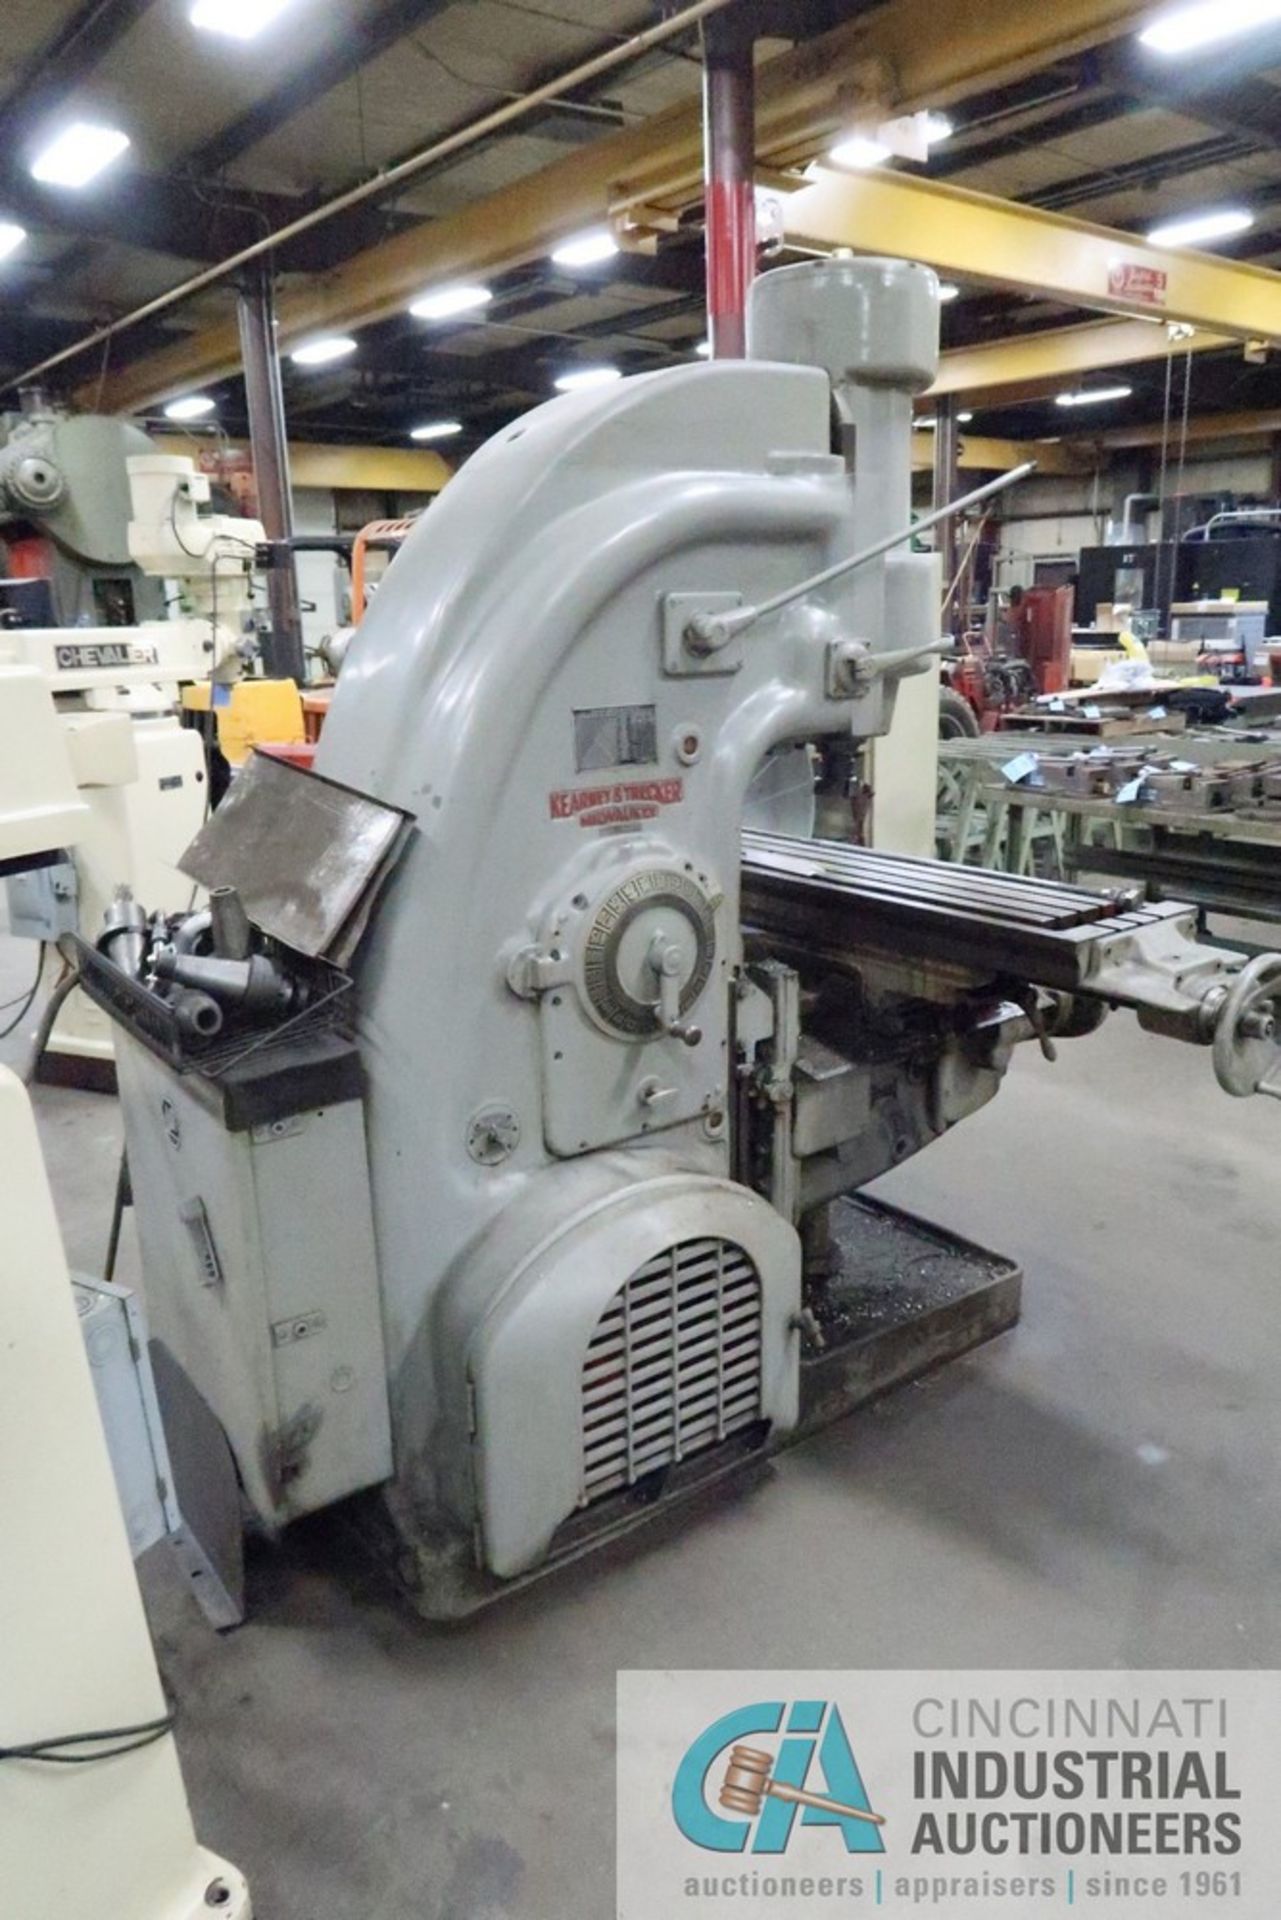 15 HP KEARNEY AND TRECKER MODEL 3CK VERTICAL MILL; S/N 6-6721, 64" X 15" TABLE, SPINDLE SPEED 15-1, - Image 2 of 10